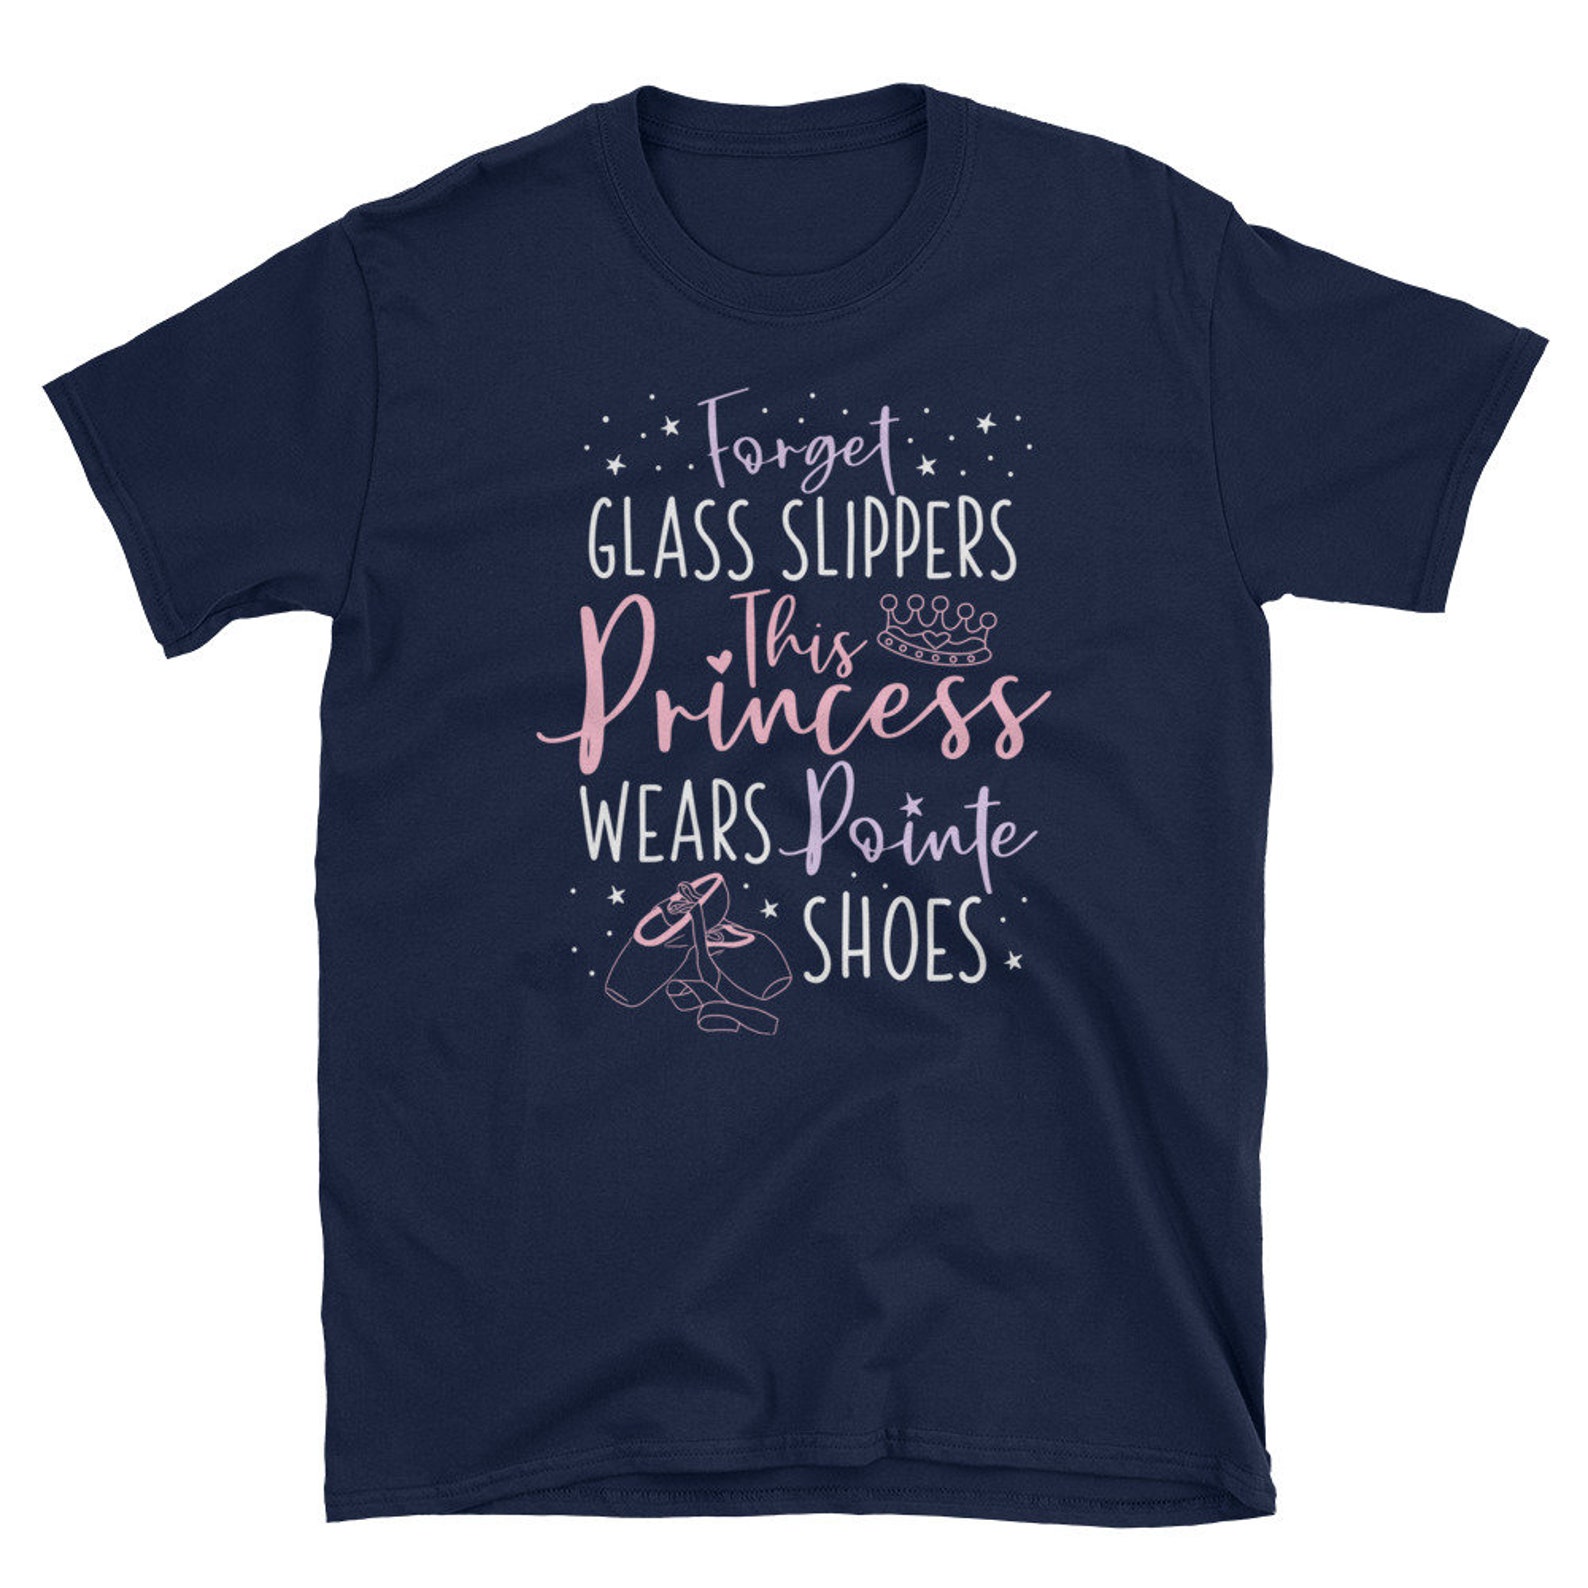 funny ballet shirt, forget glass slippers this princess wears pointe shoes, ballet dancer gift, ballerina tee, choreography unis